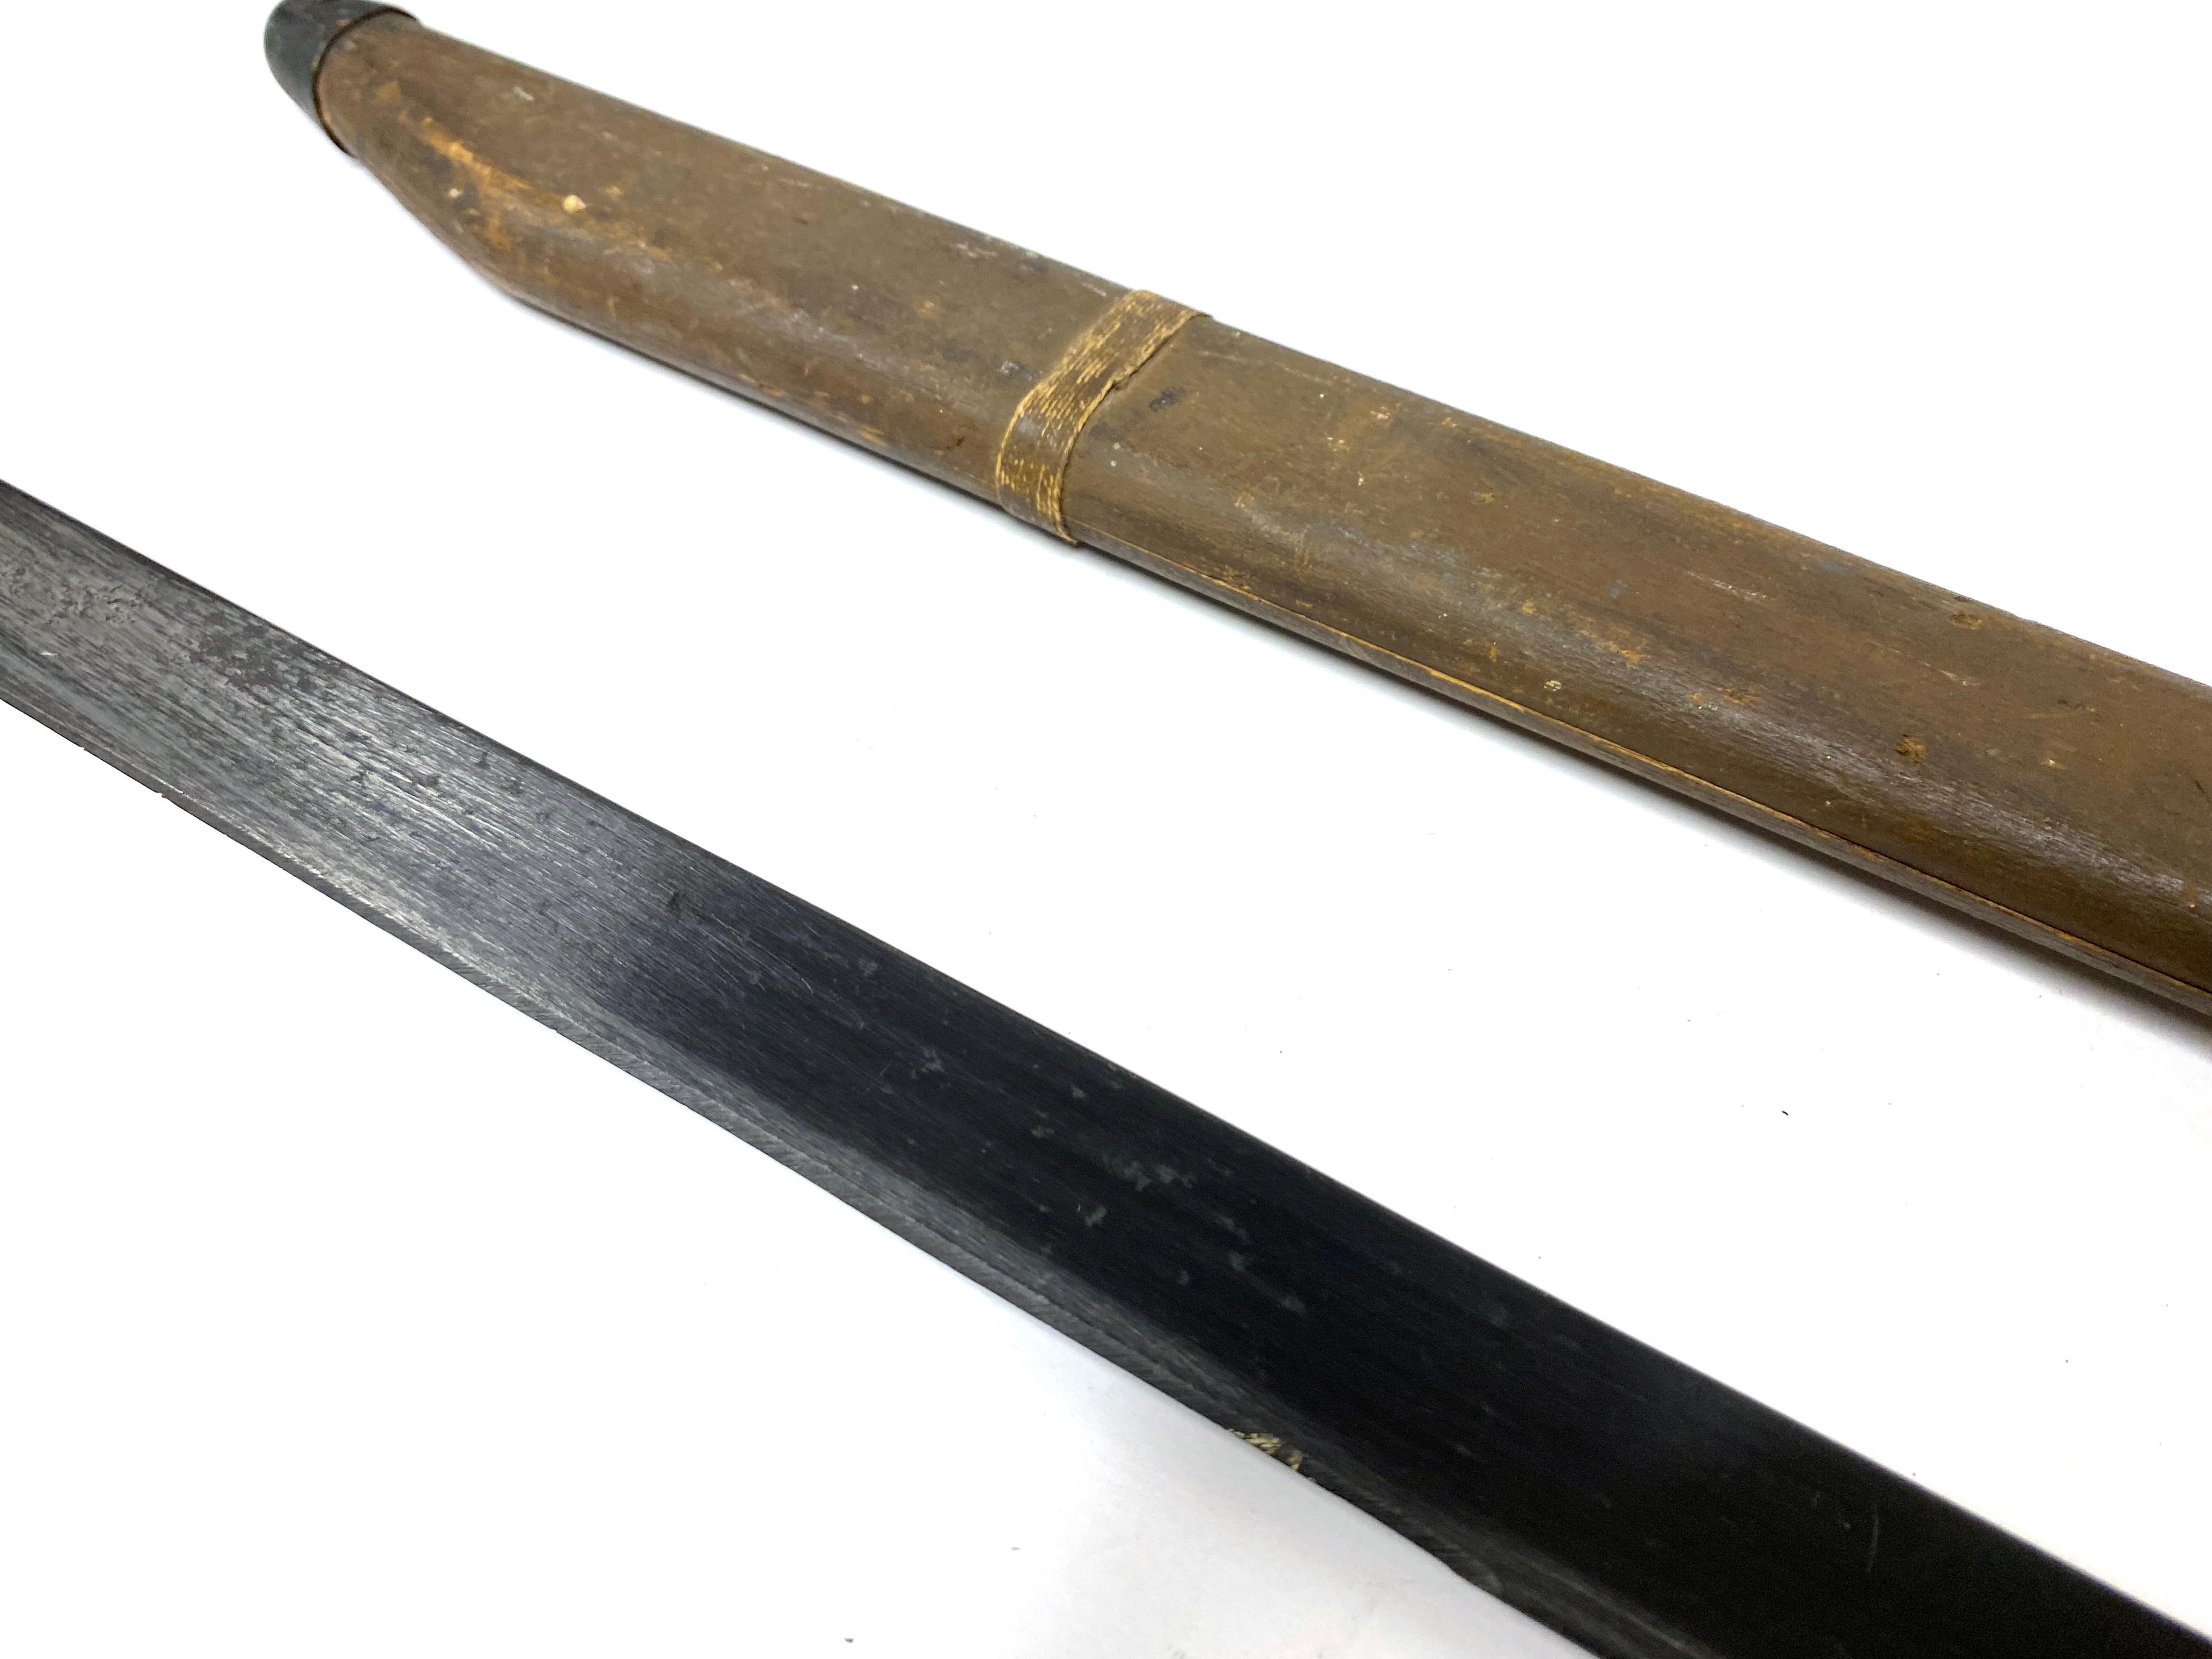 RARE Excellent Japanese Late WWII Arisaka Type 30 Bayonet by Toyoda with Wooden Scabbard